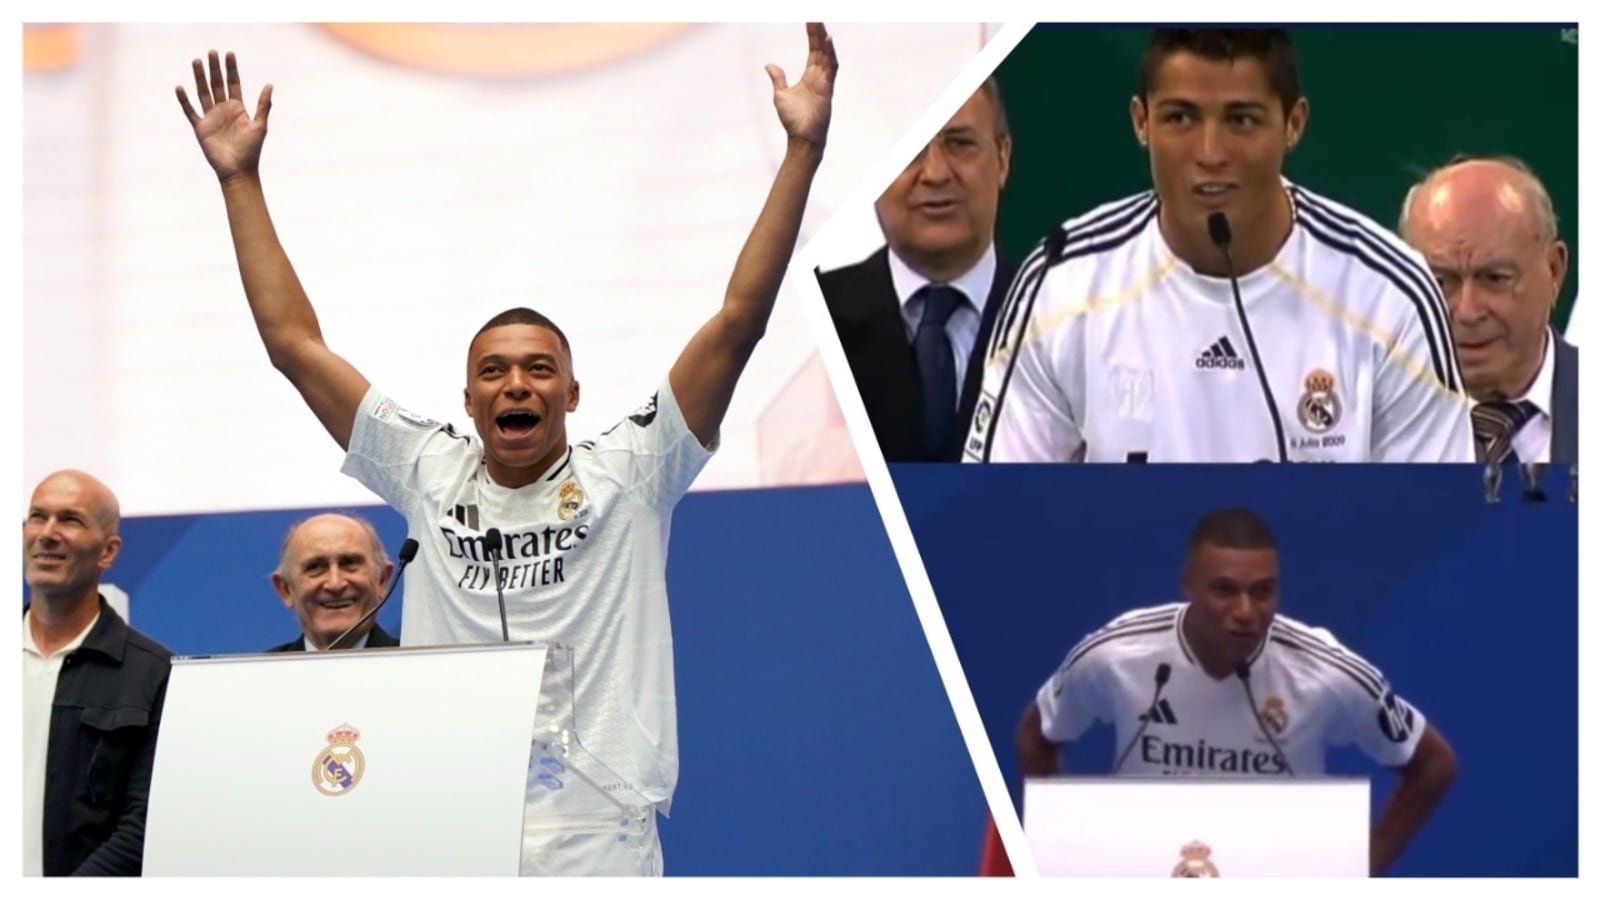 Kylian Mbappe recreates Cristiano Ronaldo’s famous gesture as Real Madrid welcomes the French captain to a packed Bernabeu | Football news